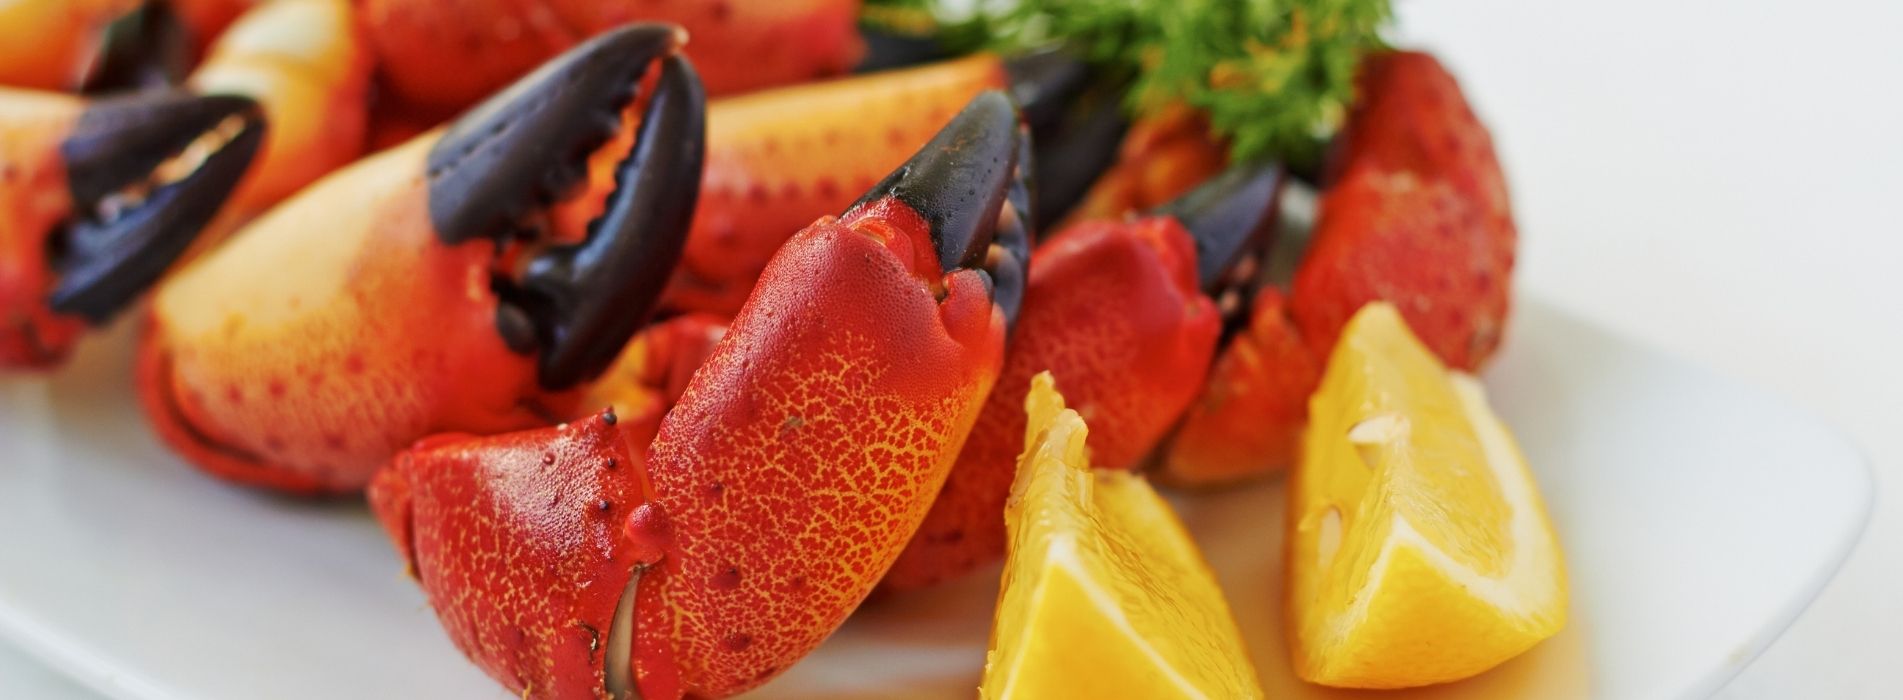 How Are Florida Stone Crabs Harvested?